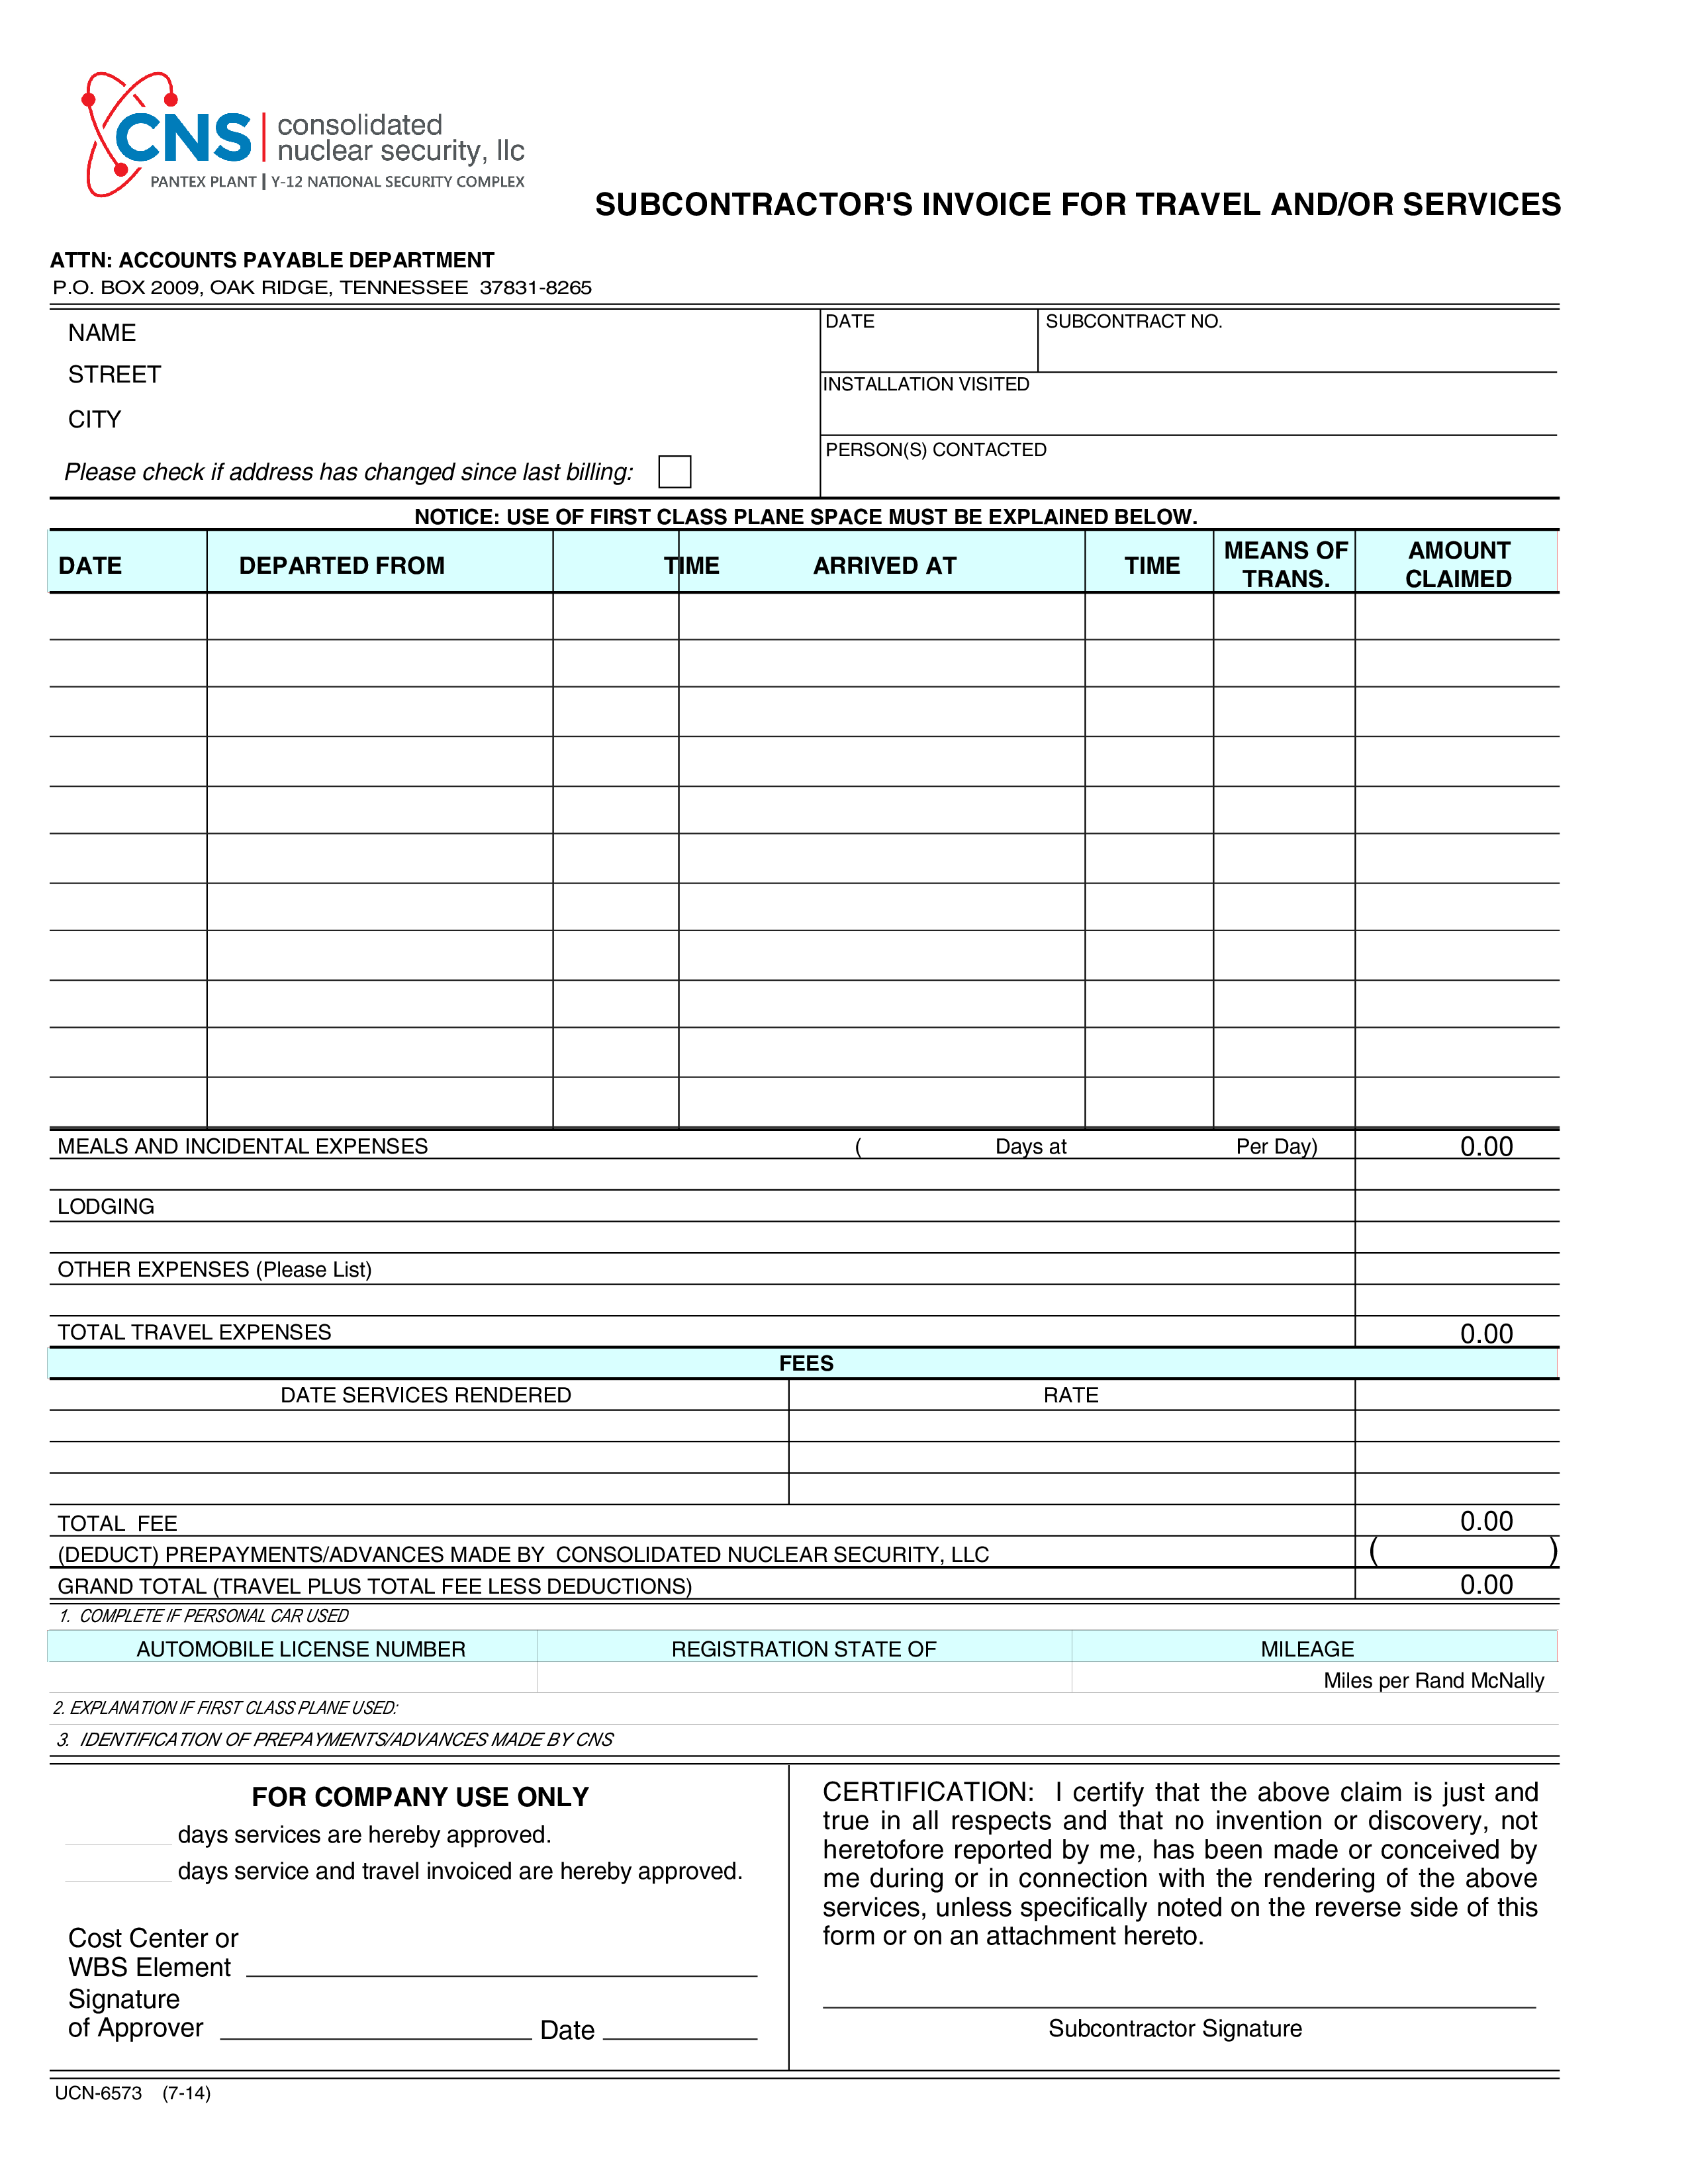 5-subcontractor-invoice-sample-excel-templates